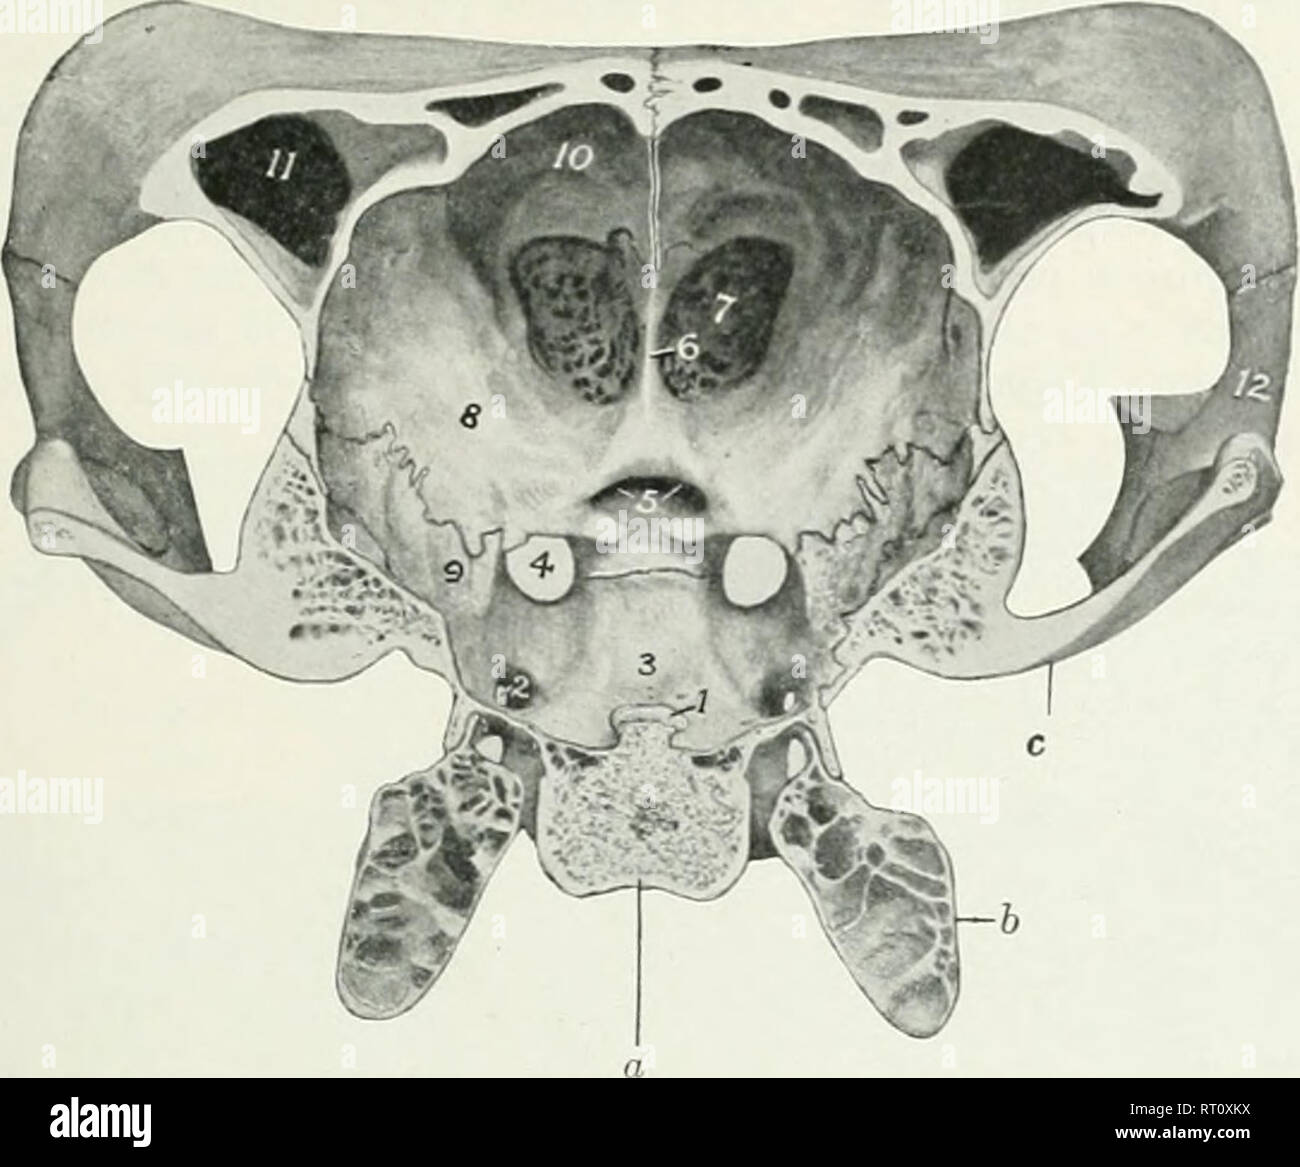 . The anatomy of the domestic animals. Veterinary anatomy. BONES OF THE CR-^NIUM 133. FjG.^iSO:—Cross-section of Cranium of Ox. The section cats the posterior part of the temporal condyle and is viewed from behind, a, Body of sphenoid; 6, bulla ossea; r, temporal condyle; 1, dorsum sellse; 2, foramen ovale; 'S. hj-pophyseal or pituitary fossa; 4. foramen orbito-rotundum; 5, optic foramina; 6, crista galli; 7. cribriform plate of ethmoid; S. orbital wing of sphenoid; 9, temporal wing of sphenoid; 10. internal plate of frontal bone; 11. frontal sinus; 12, temporal process of malar bone.. Please  Stock Photo